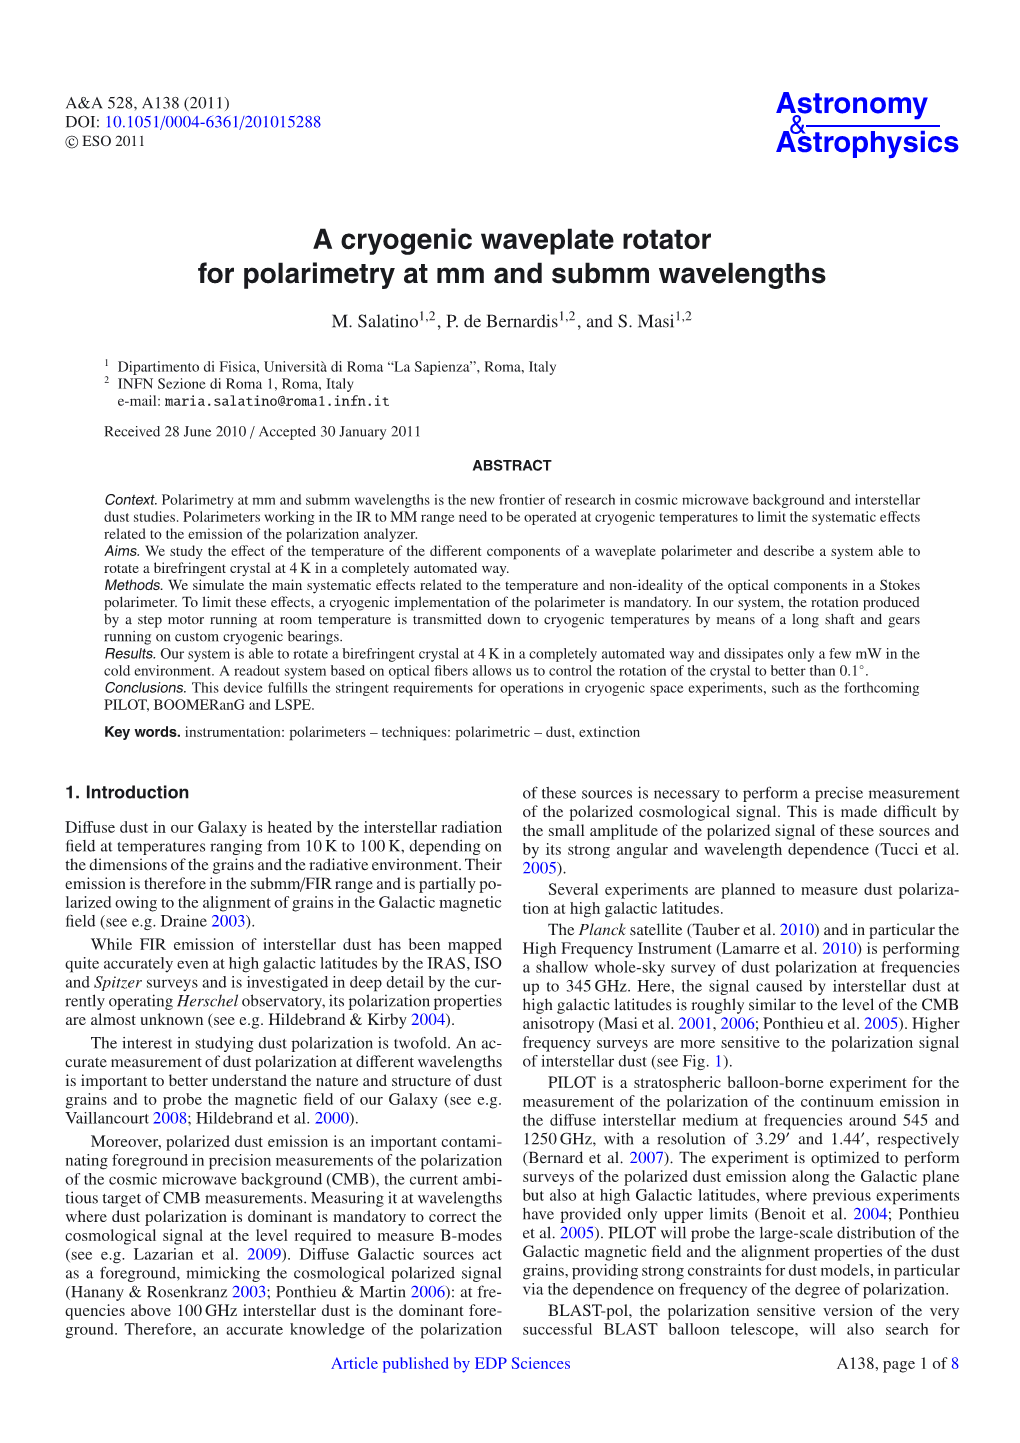 A Cryogenic Waveplate Rotator for Polarimetry at Mm and Submm Wavelengths